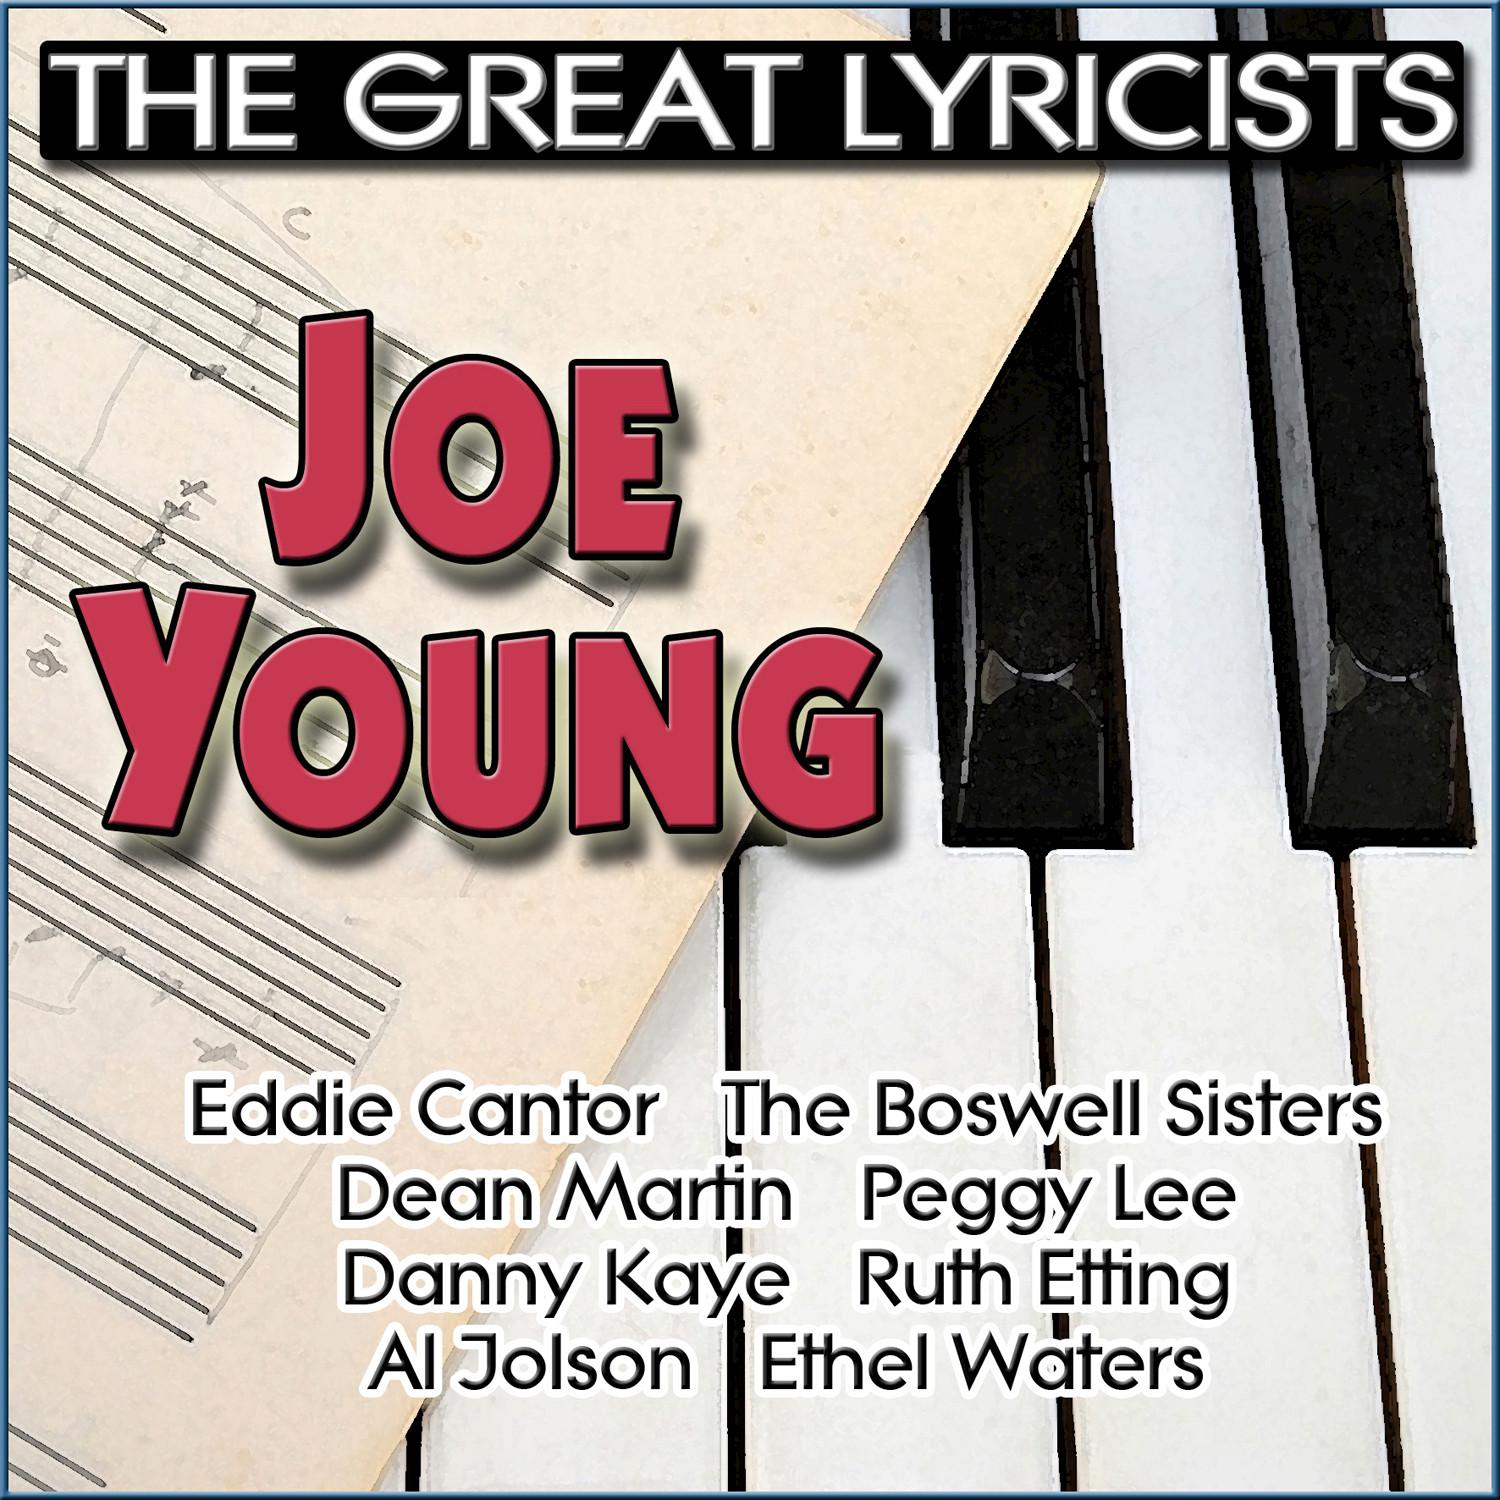 The Great Lyricists - Joe Young